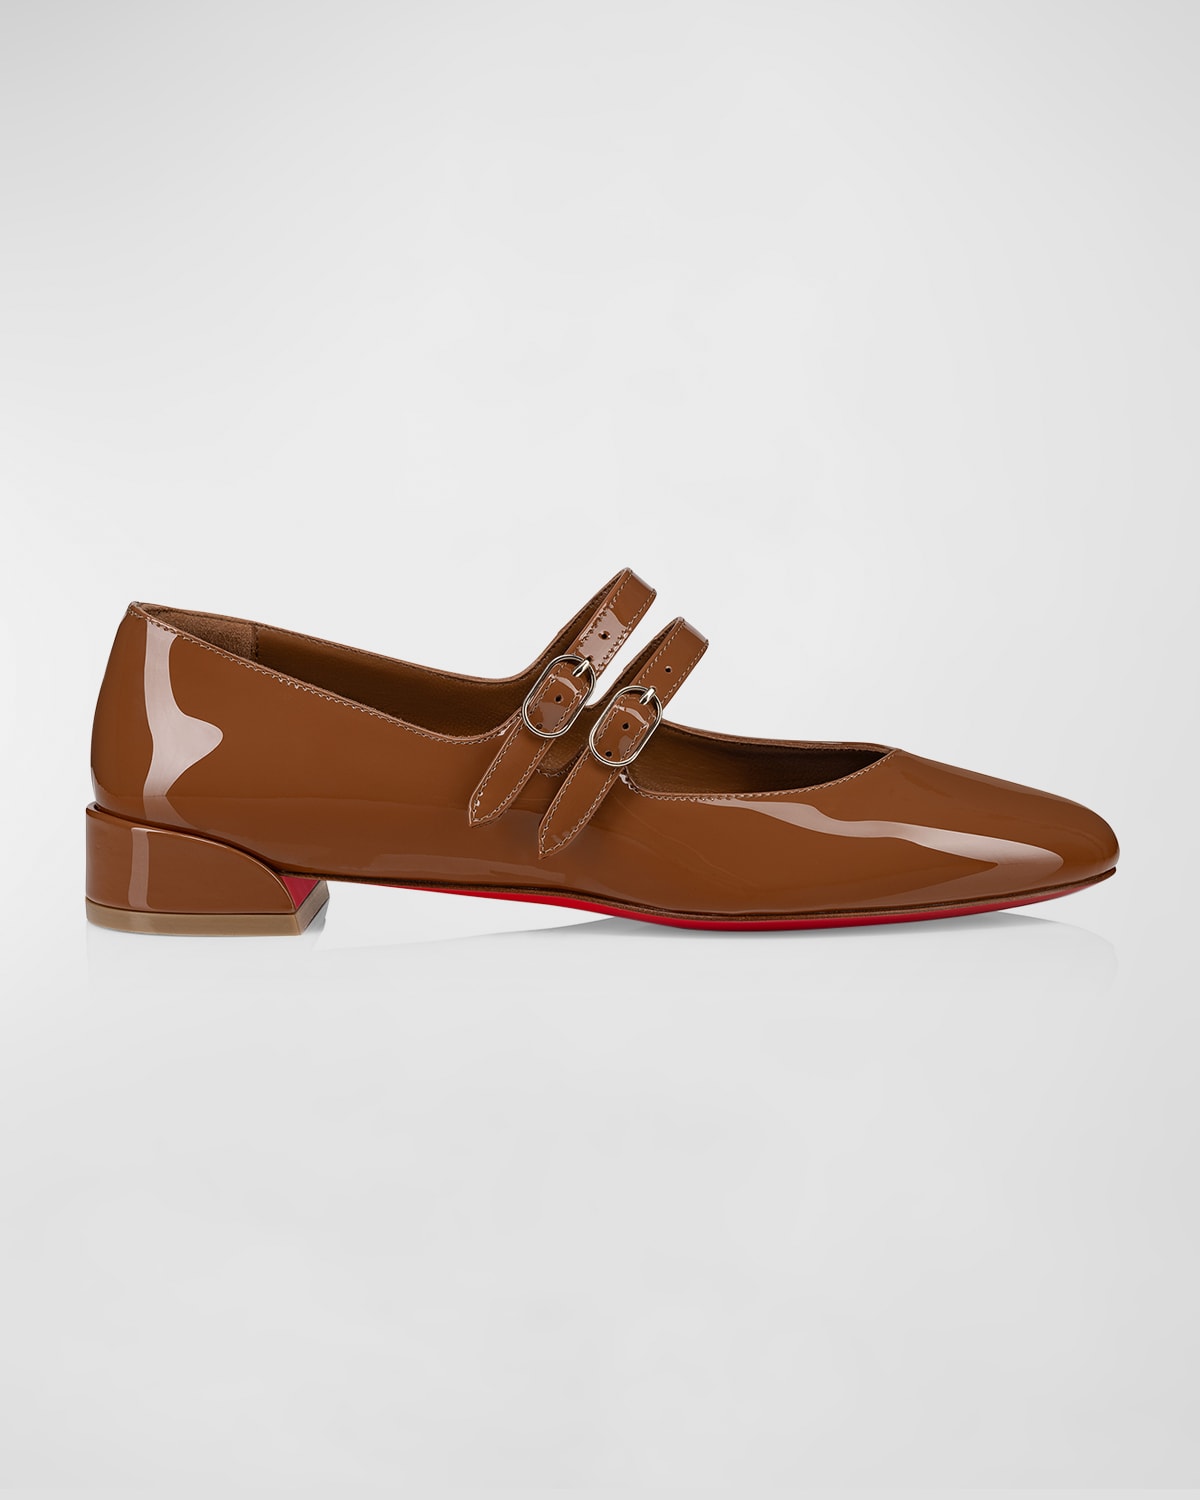 Christian Louboutin Sweet Jane Patent Red Sole Ballerina Flats In Brown